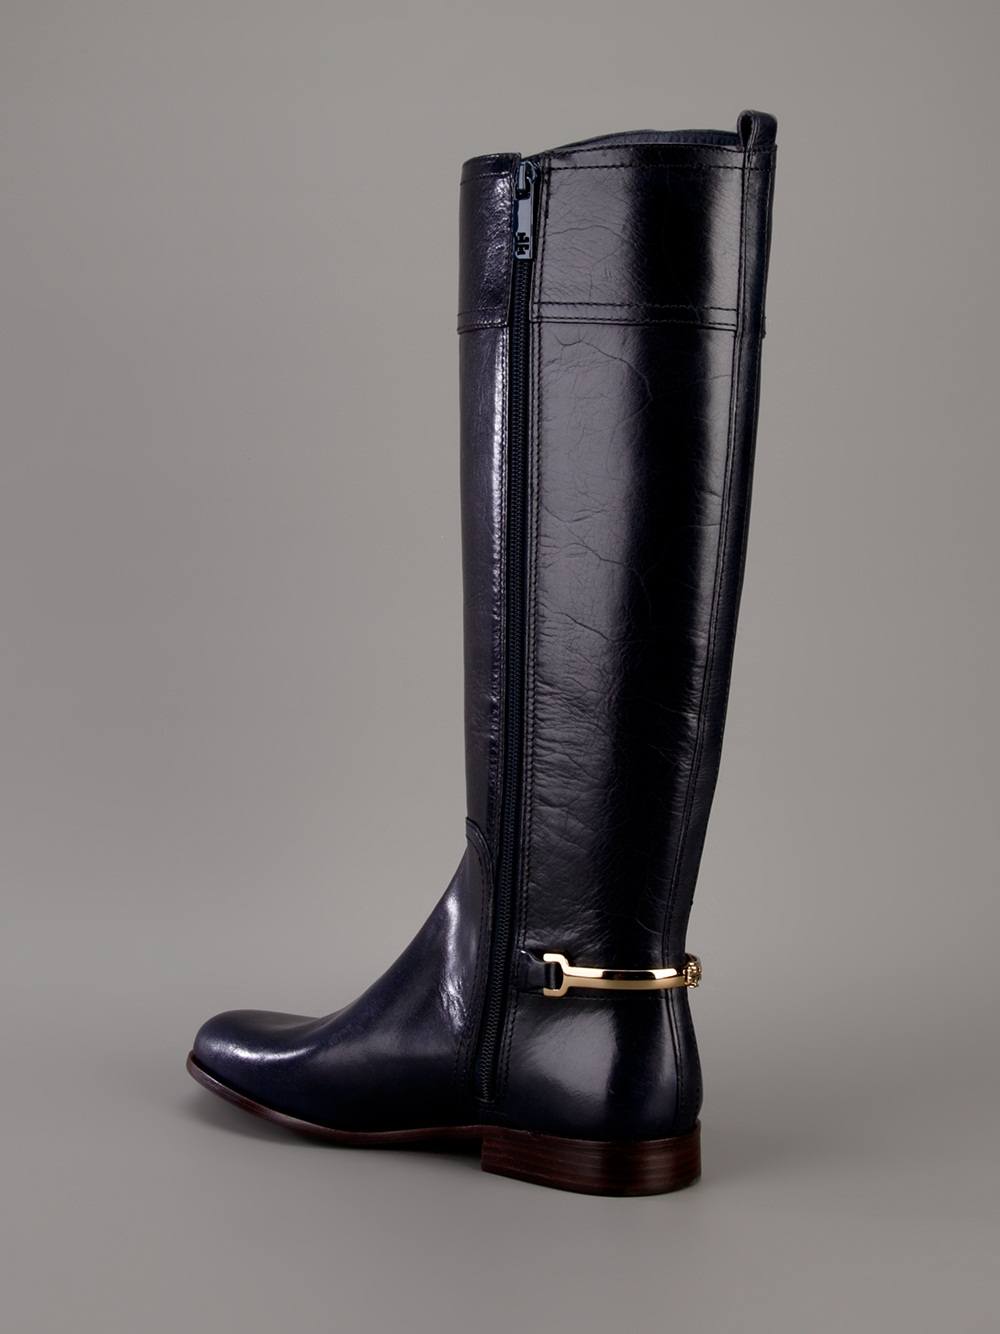 Tory Burch Riding Style Boot in Blue - Lyst